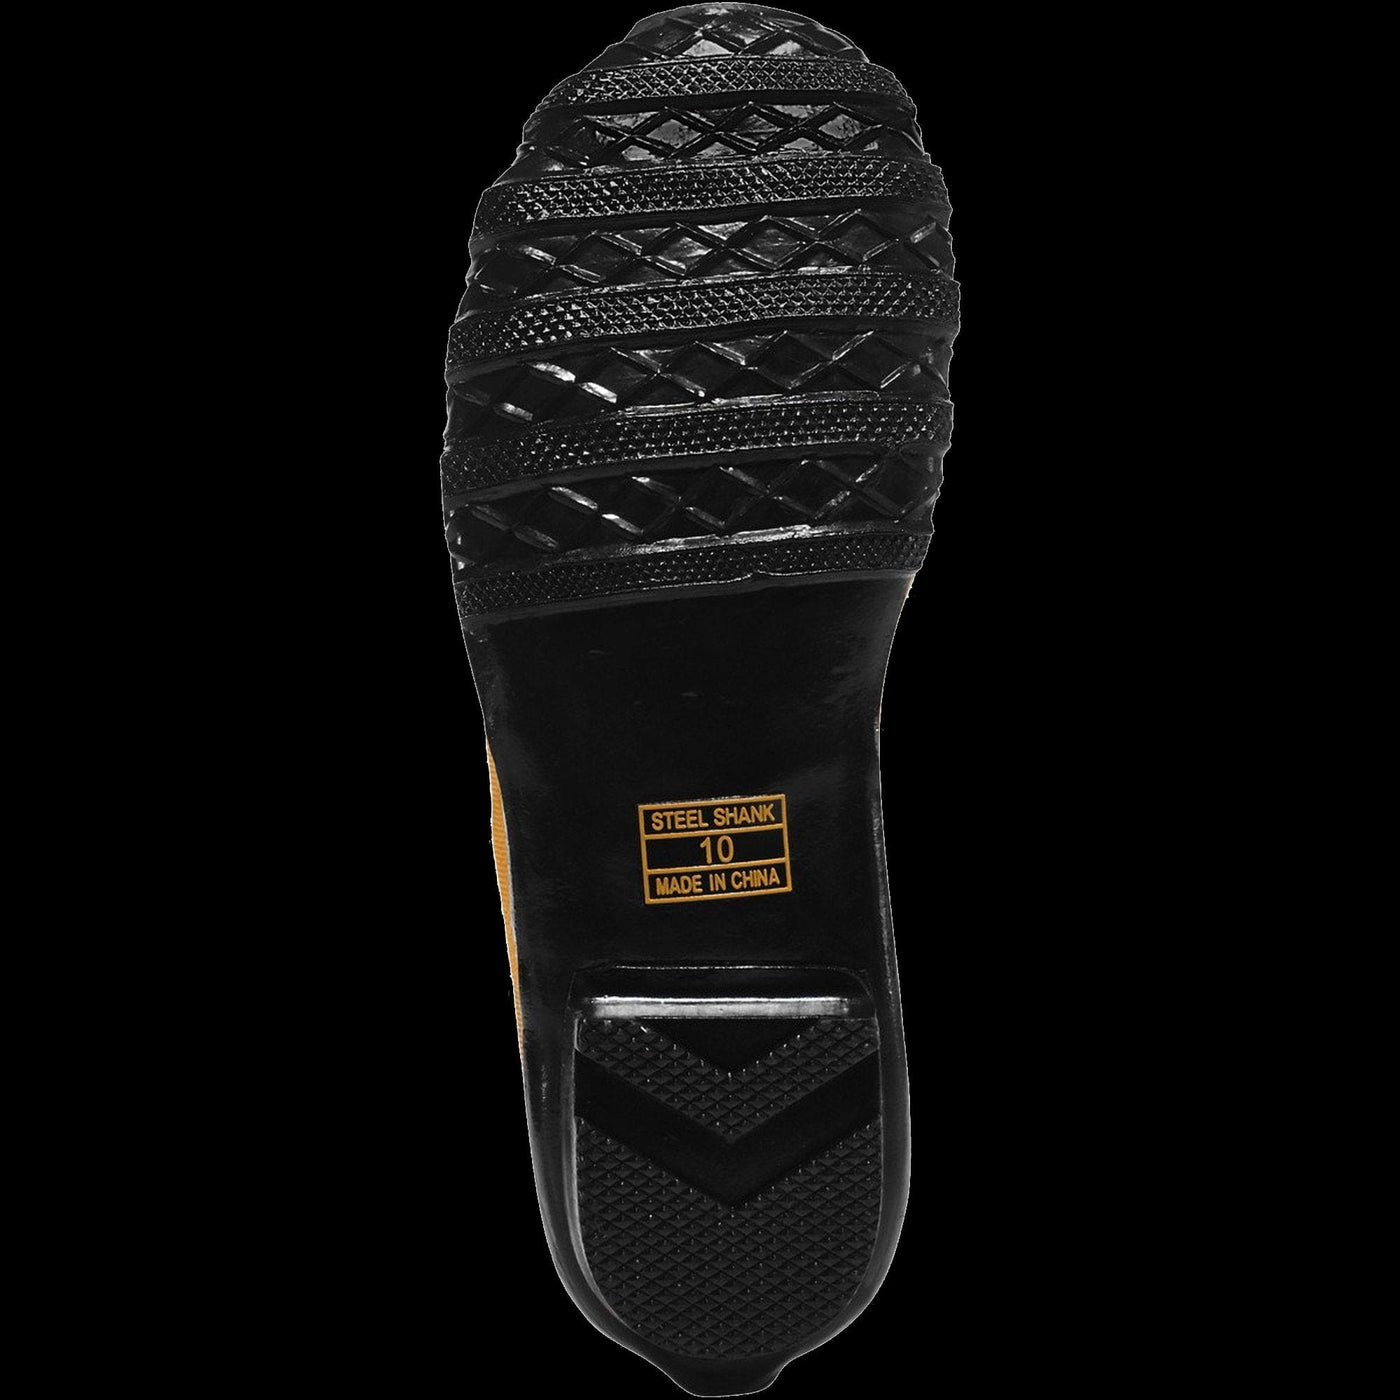 Lacrosse 12" Insulated Pac Steel Toe sole